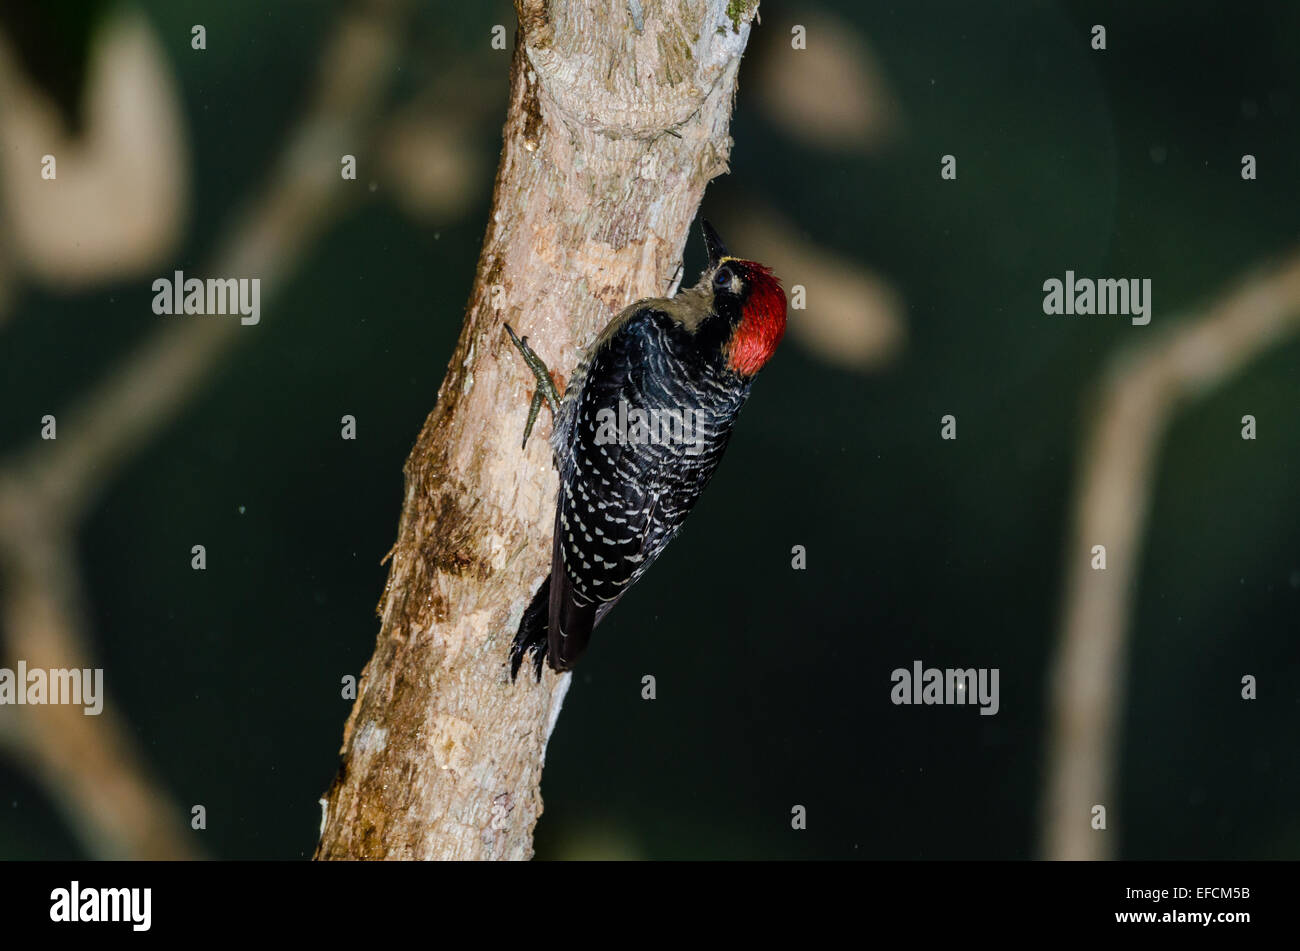 A Black-cheeked Woodpecker (Melanerpes pucherani) on a tree. Belize, Central America. Stock Photo